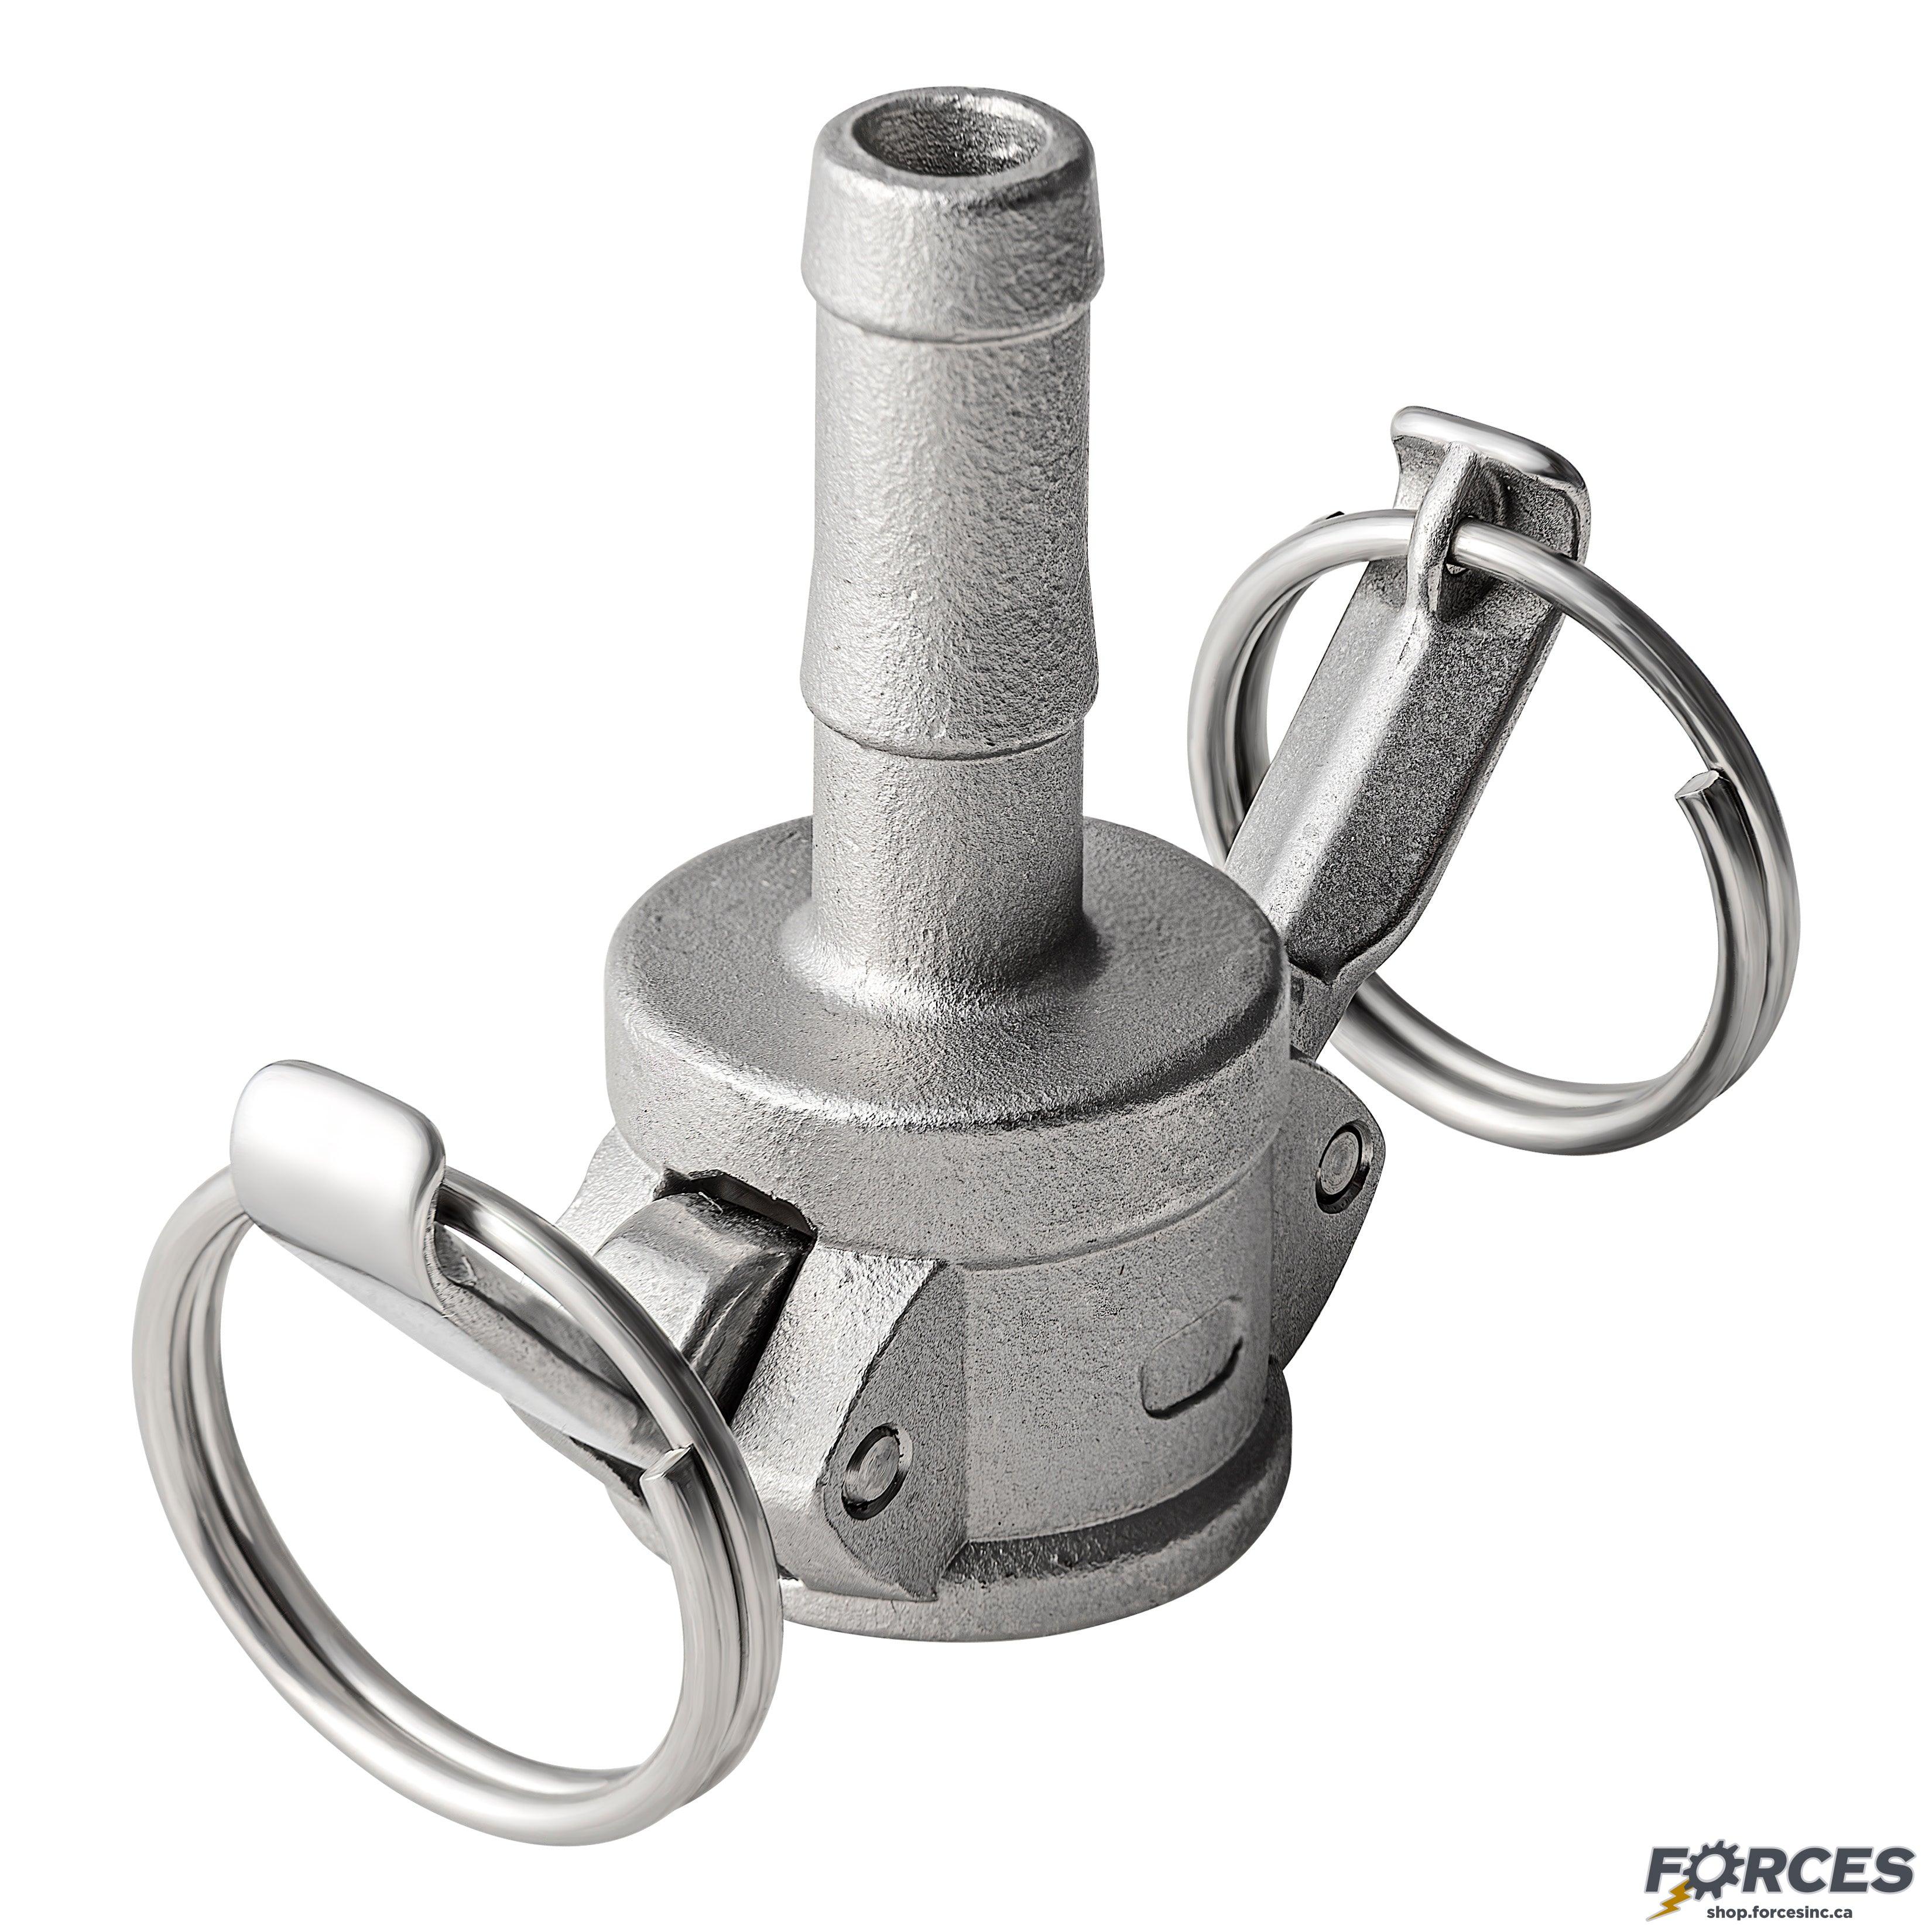 2" Type C Camlock Fitting Stainless Steel 316 - Forces Inc